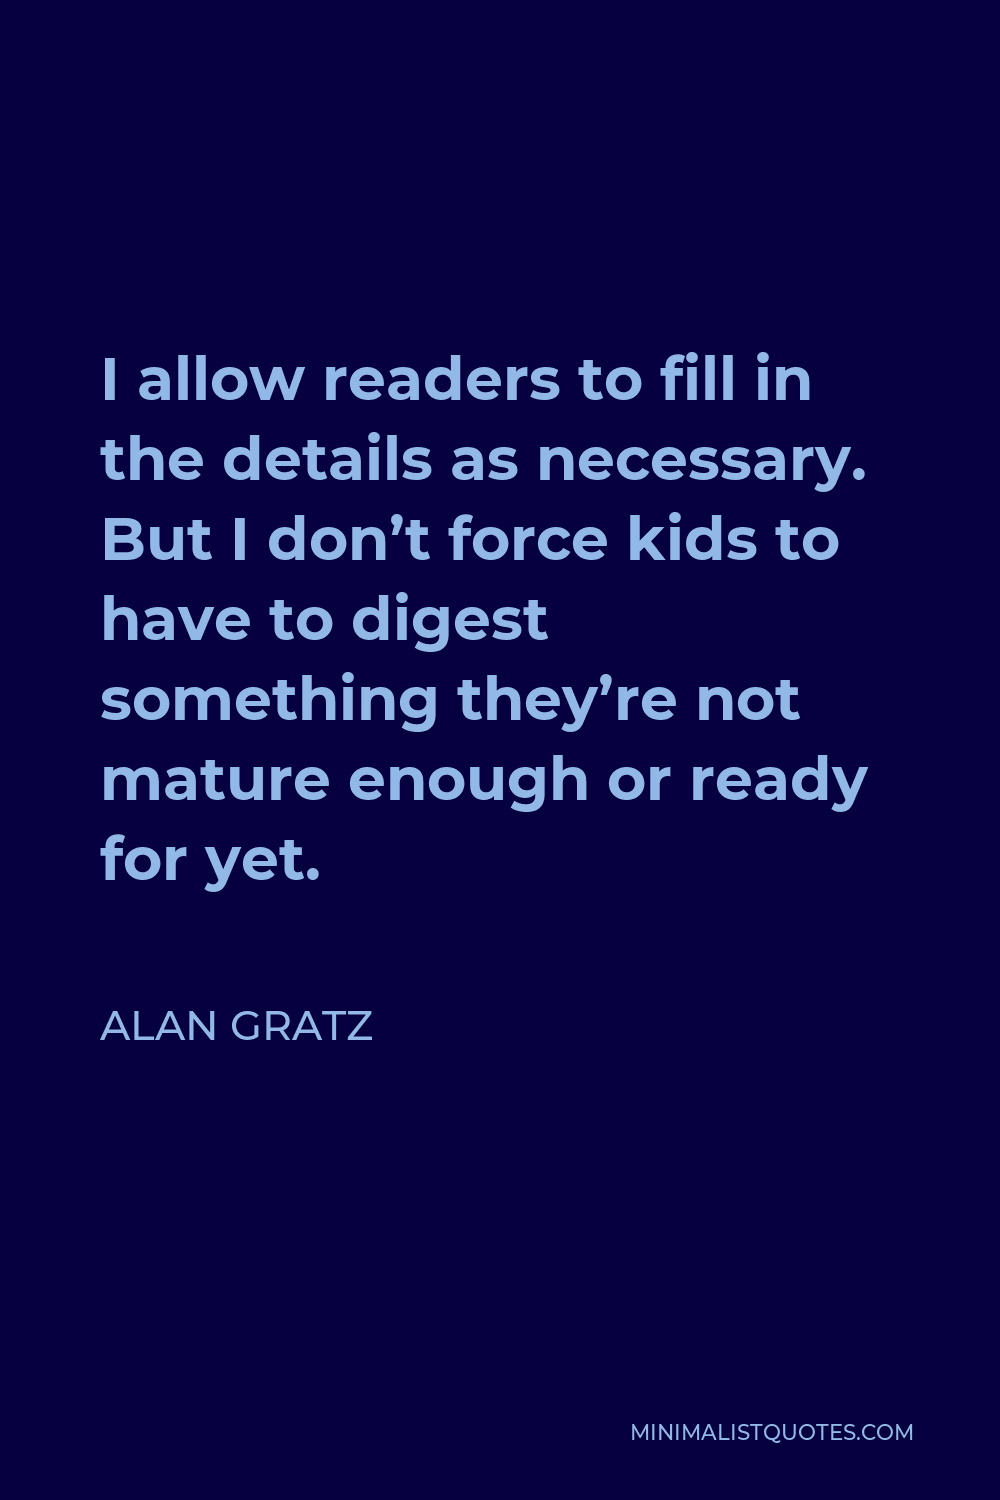 Alan Gratz Quote - I allow readers to fill in the details as necessary. But I don’t force kids to have to digest something they’re not mature enough or ready for yet.